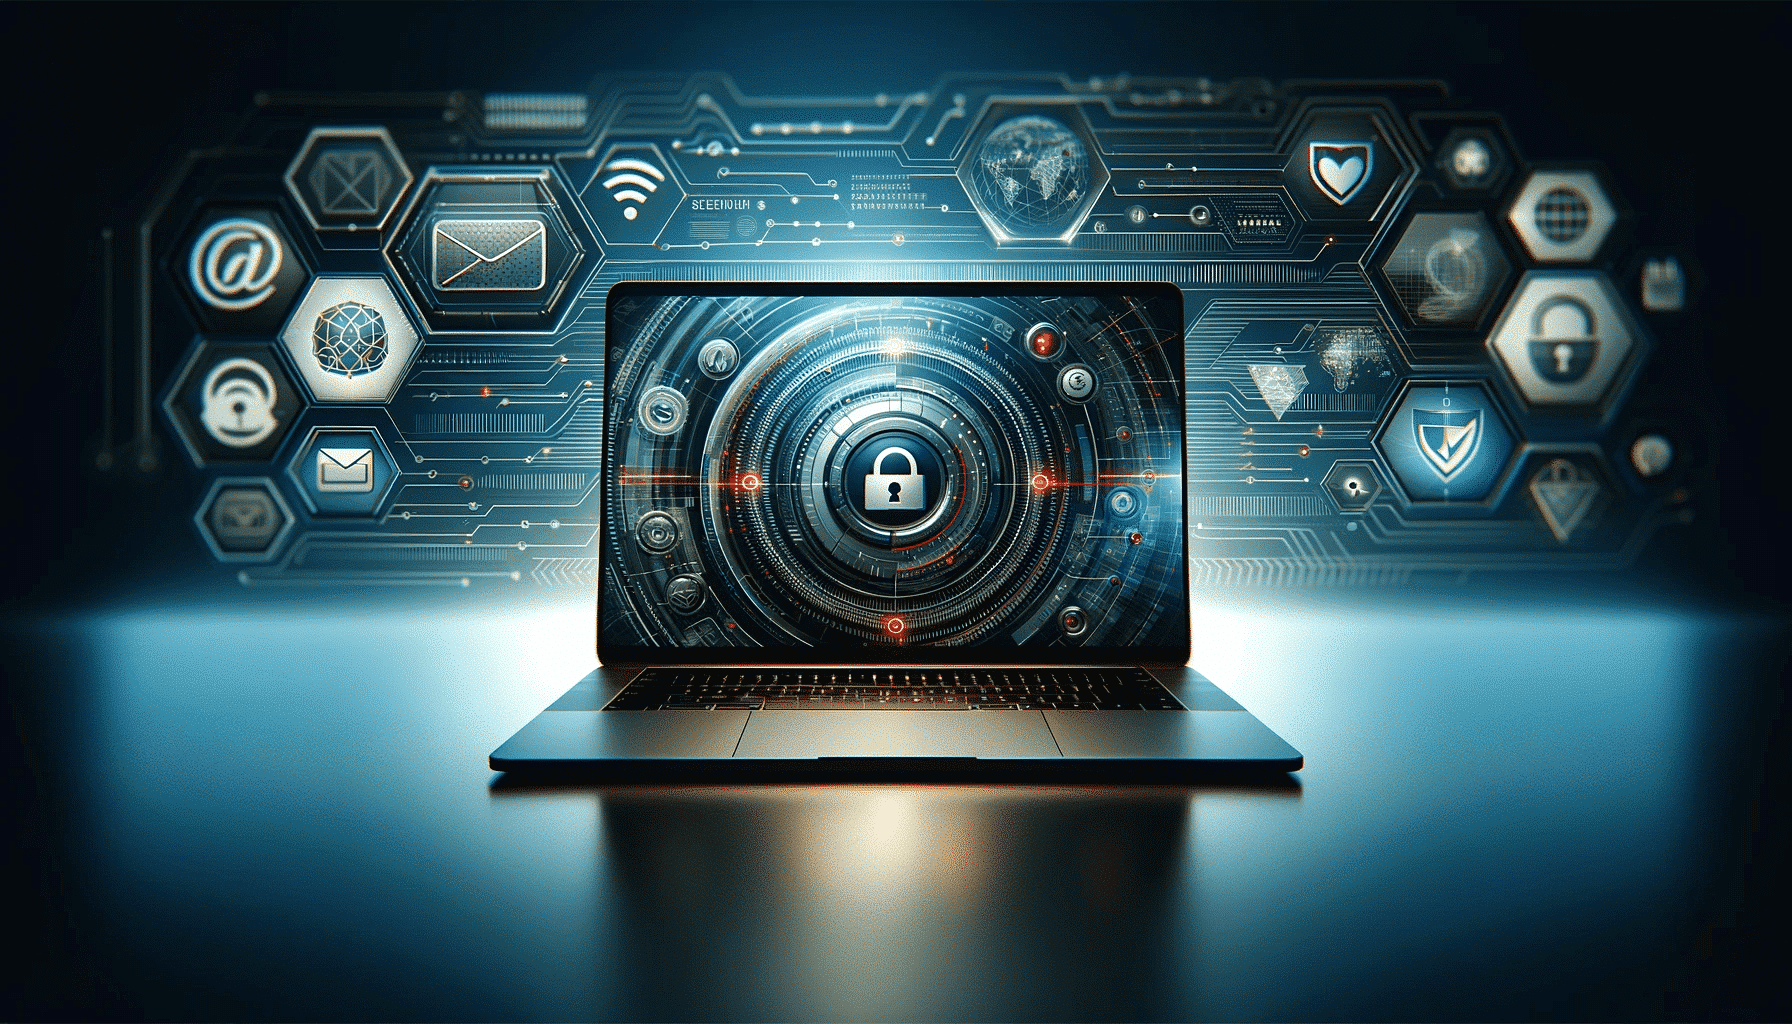 Laptop with futuristic security system interface